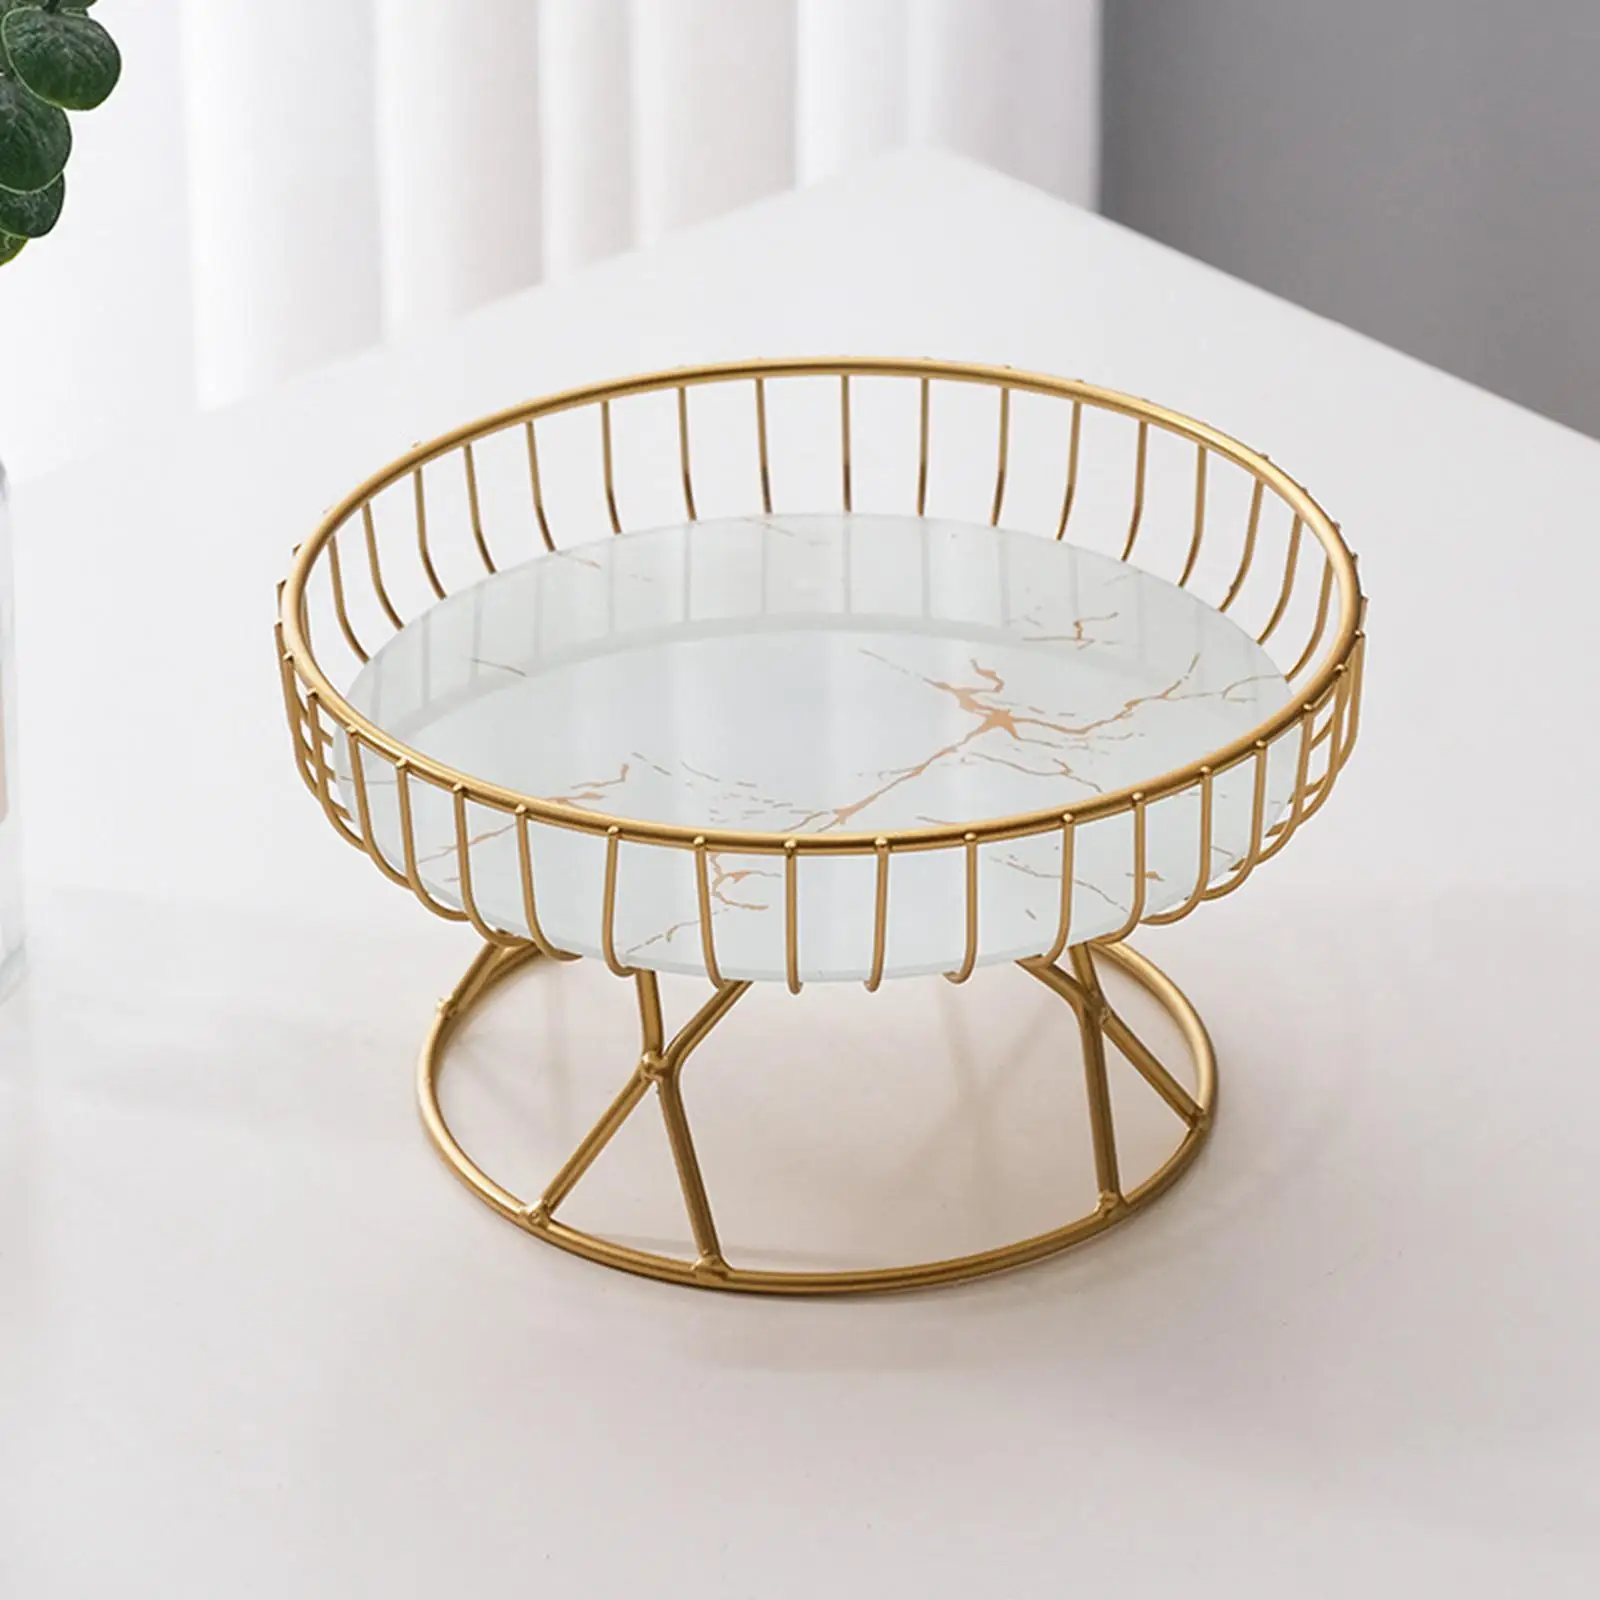 Tabletop Golden Metal Iron Wire Countertop Fruit Tray Cakes Holder, Breathable Stylish